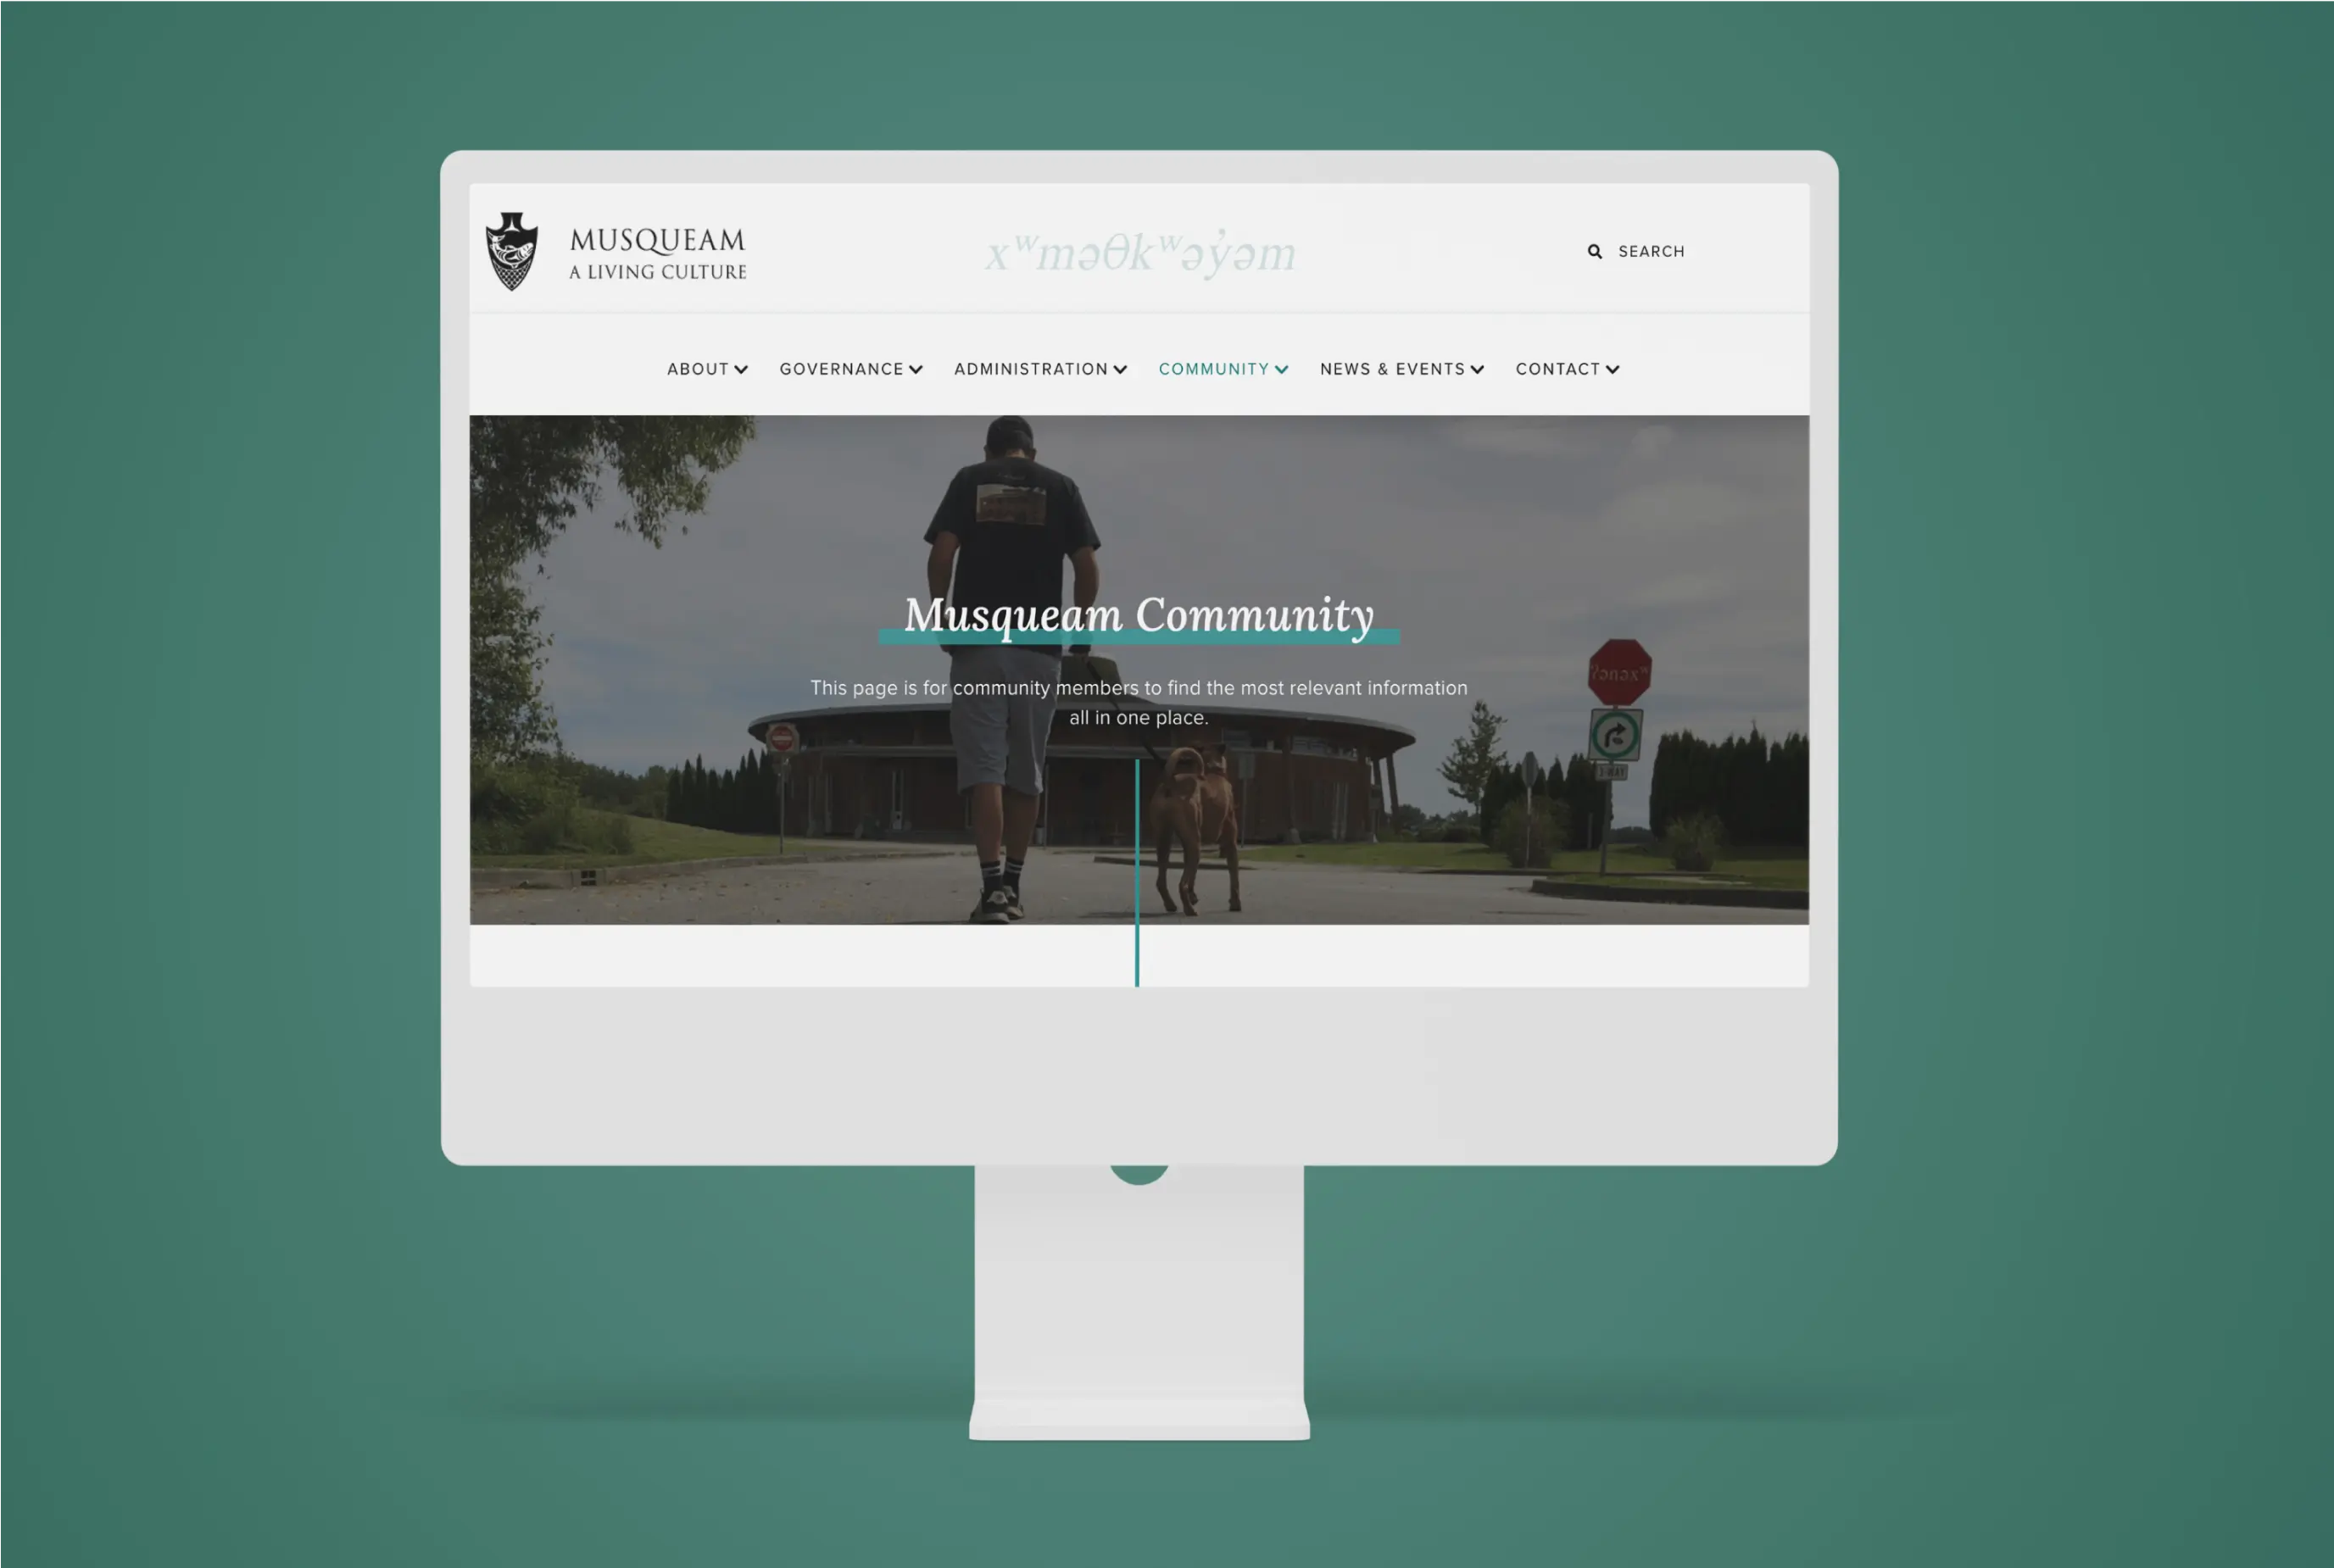 The Community landing page of the Musqueam A Living Culture website showcased in a desktop device.